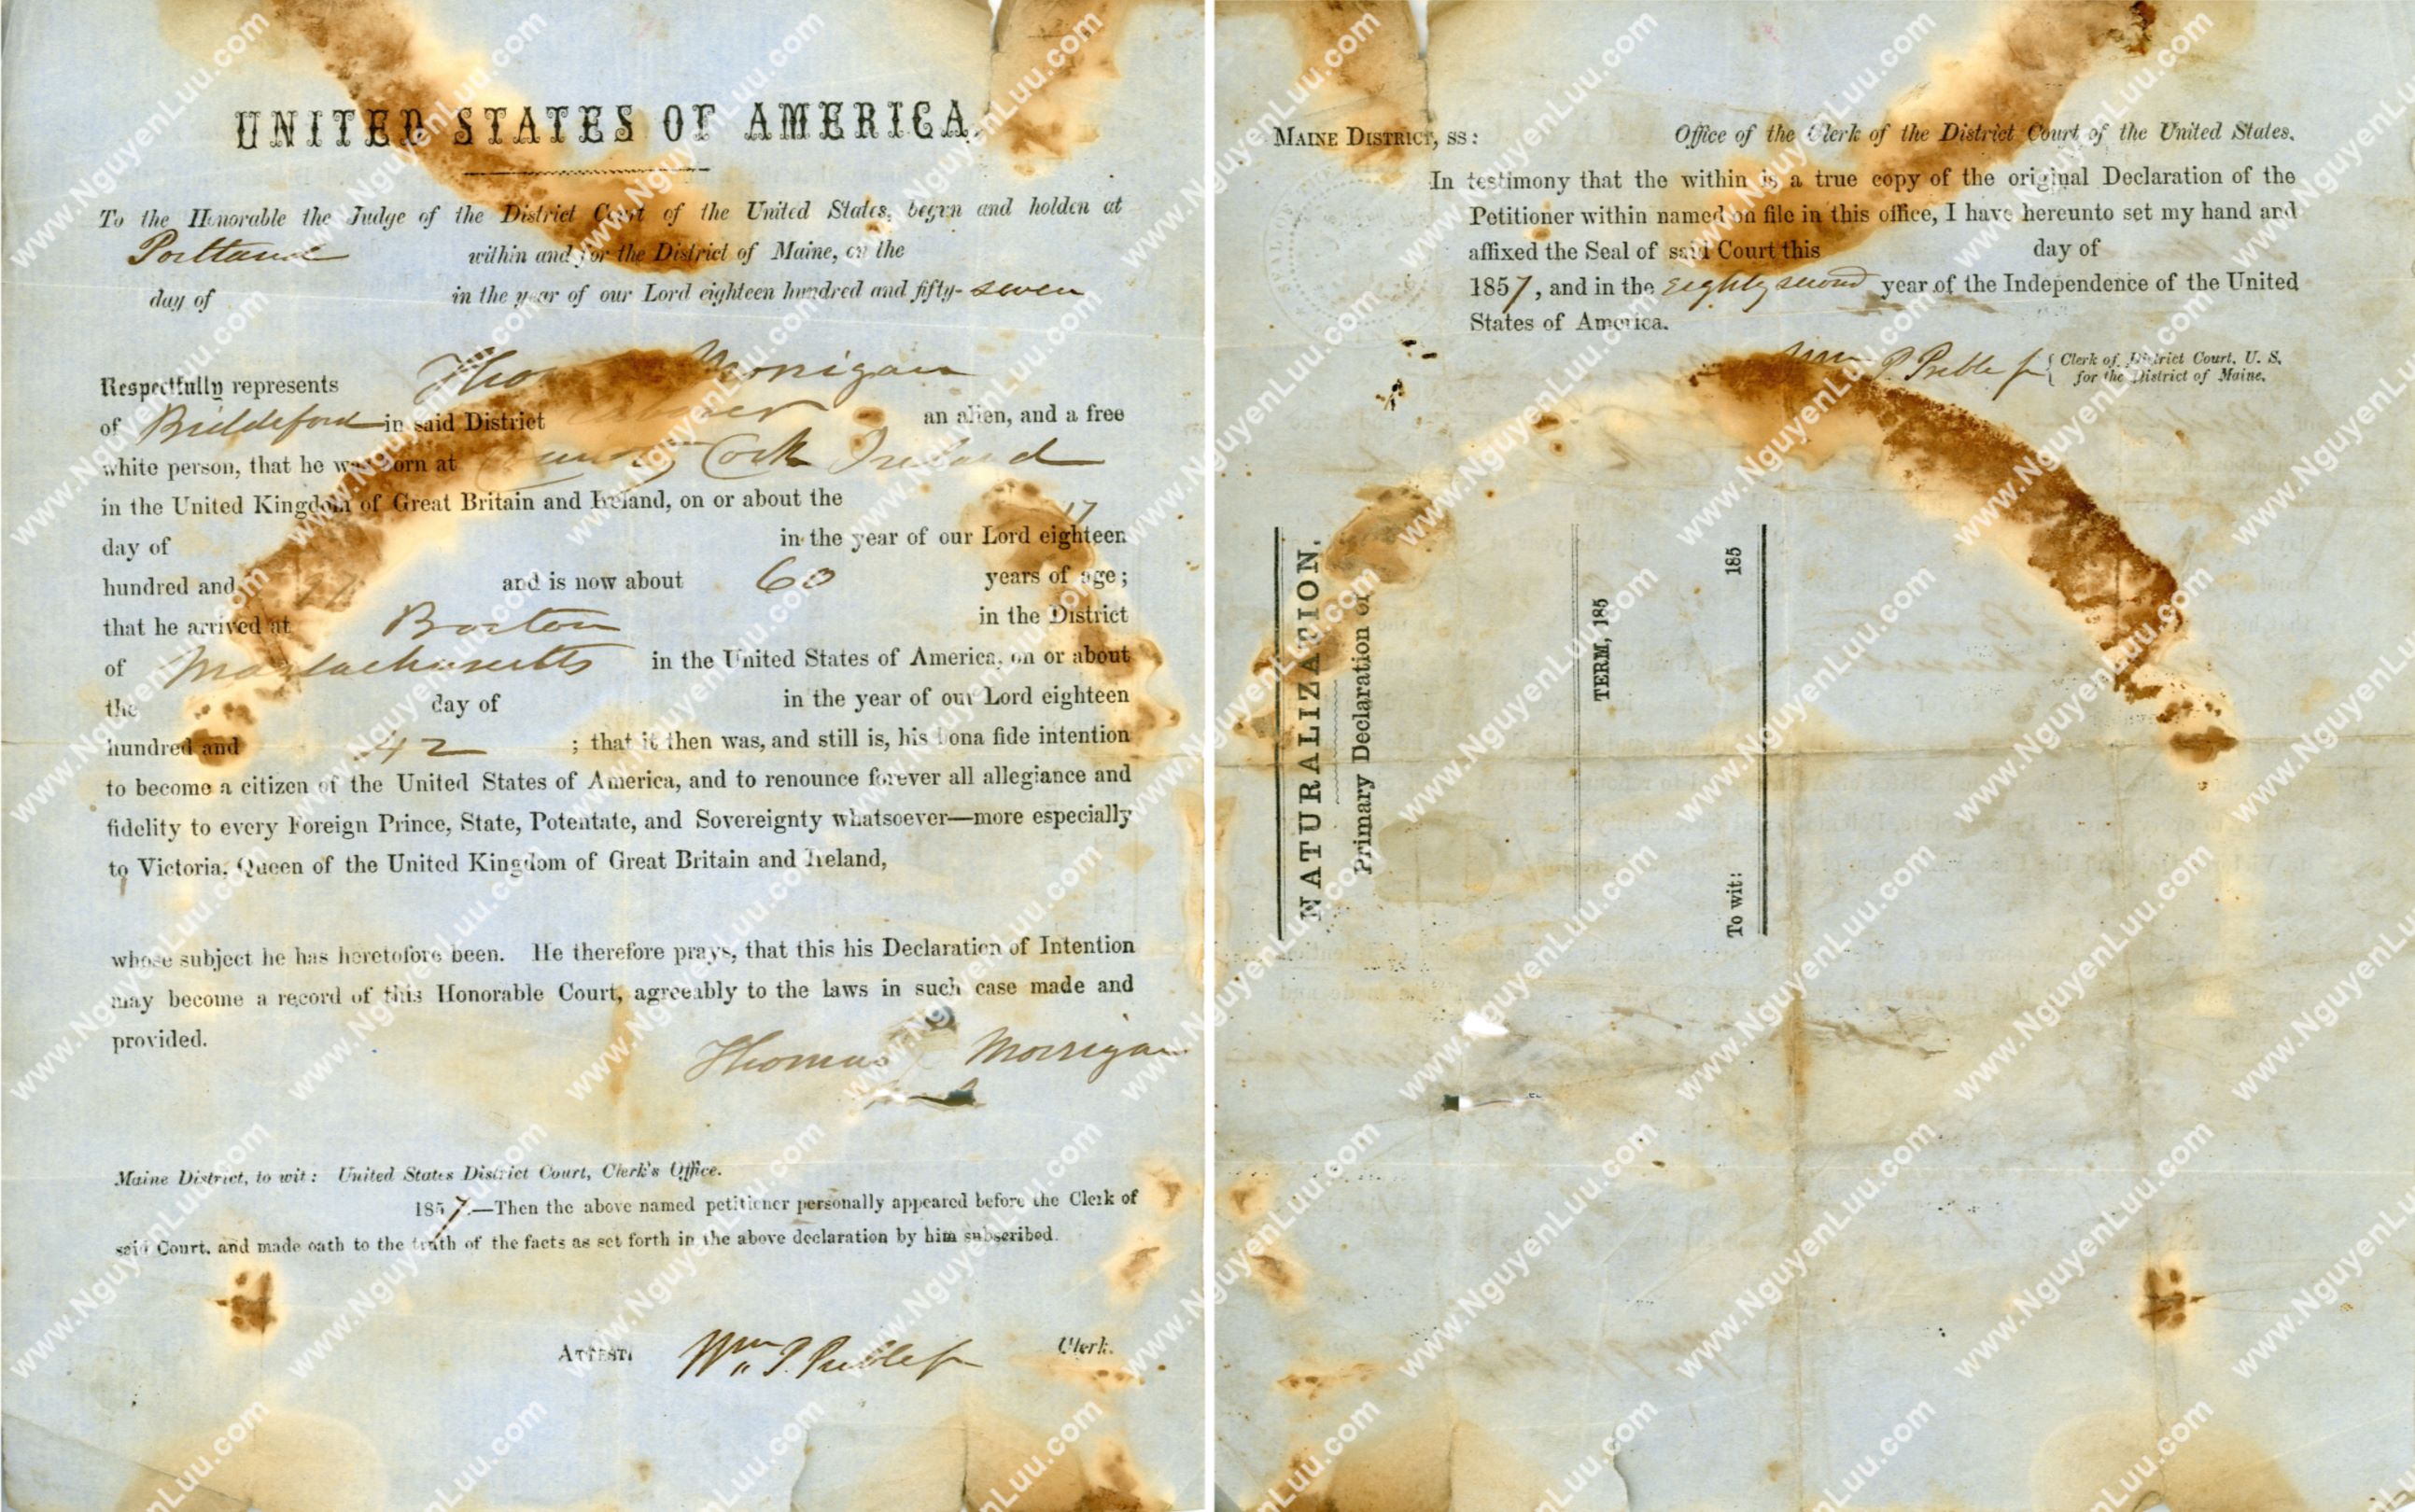 U.S. Certificate of Citizenship issued in the District of Maine in 1857